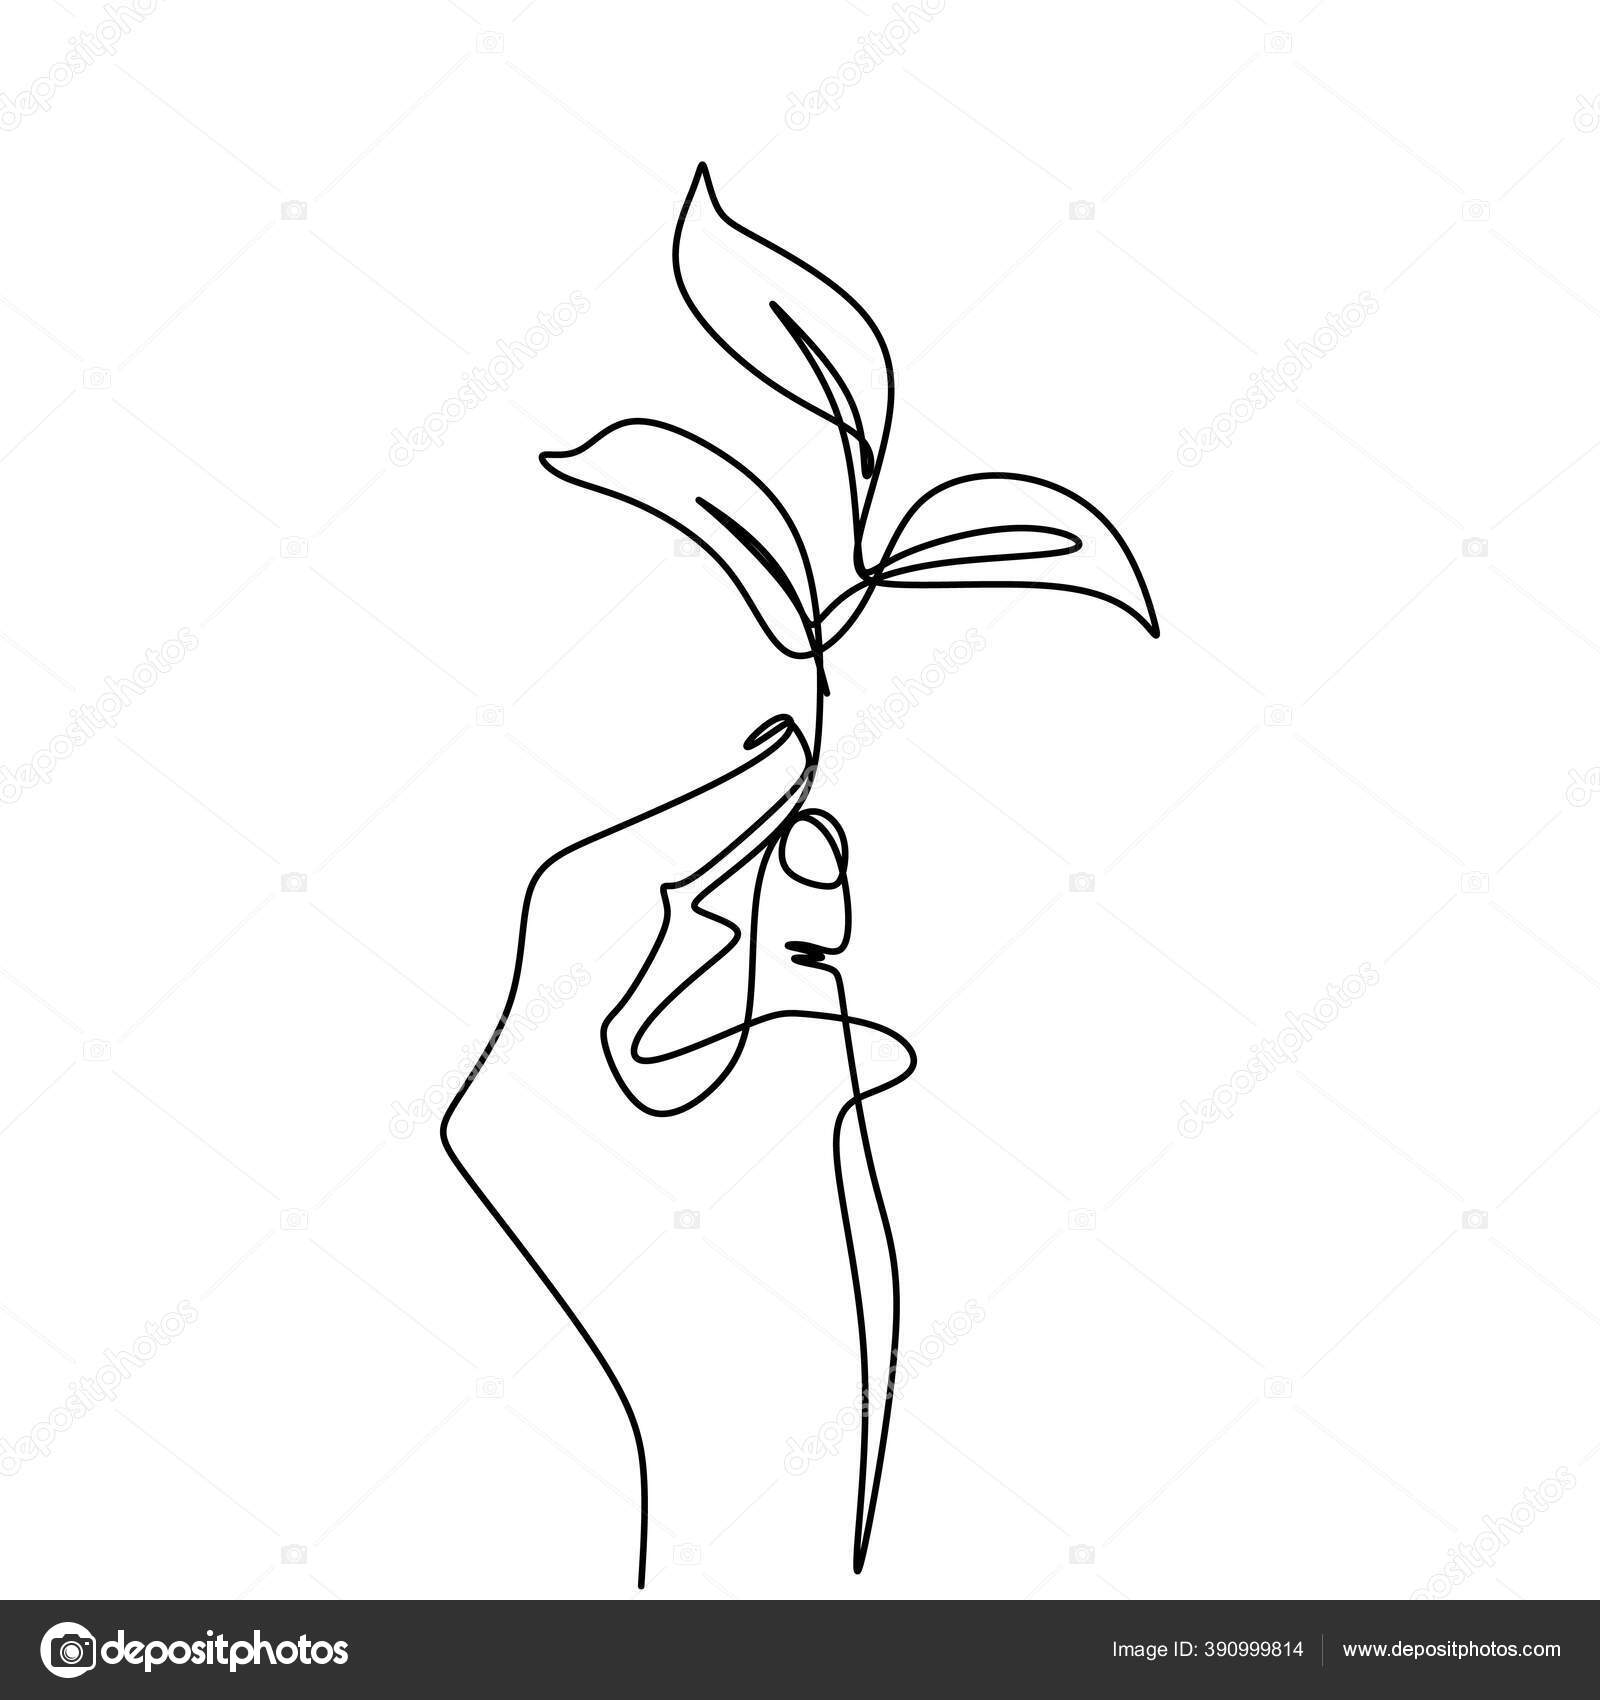 Continuous Line Drawing Hand Growing Plant Hand's Person Hand Vector Image by ©ngupakarti #390999814